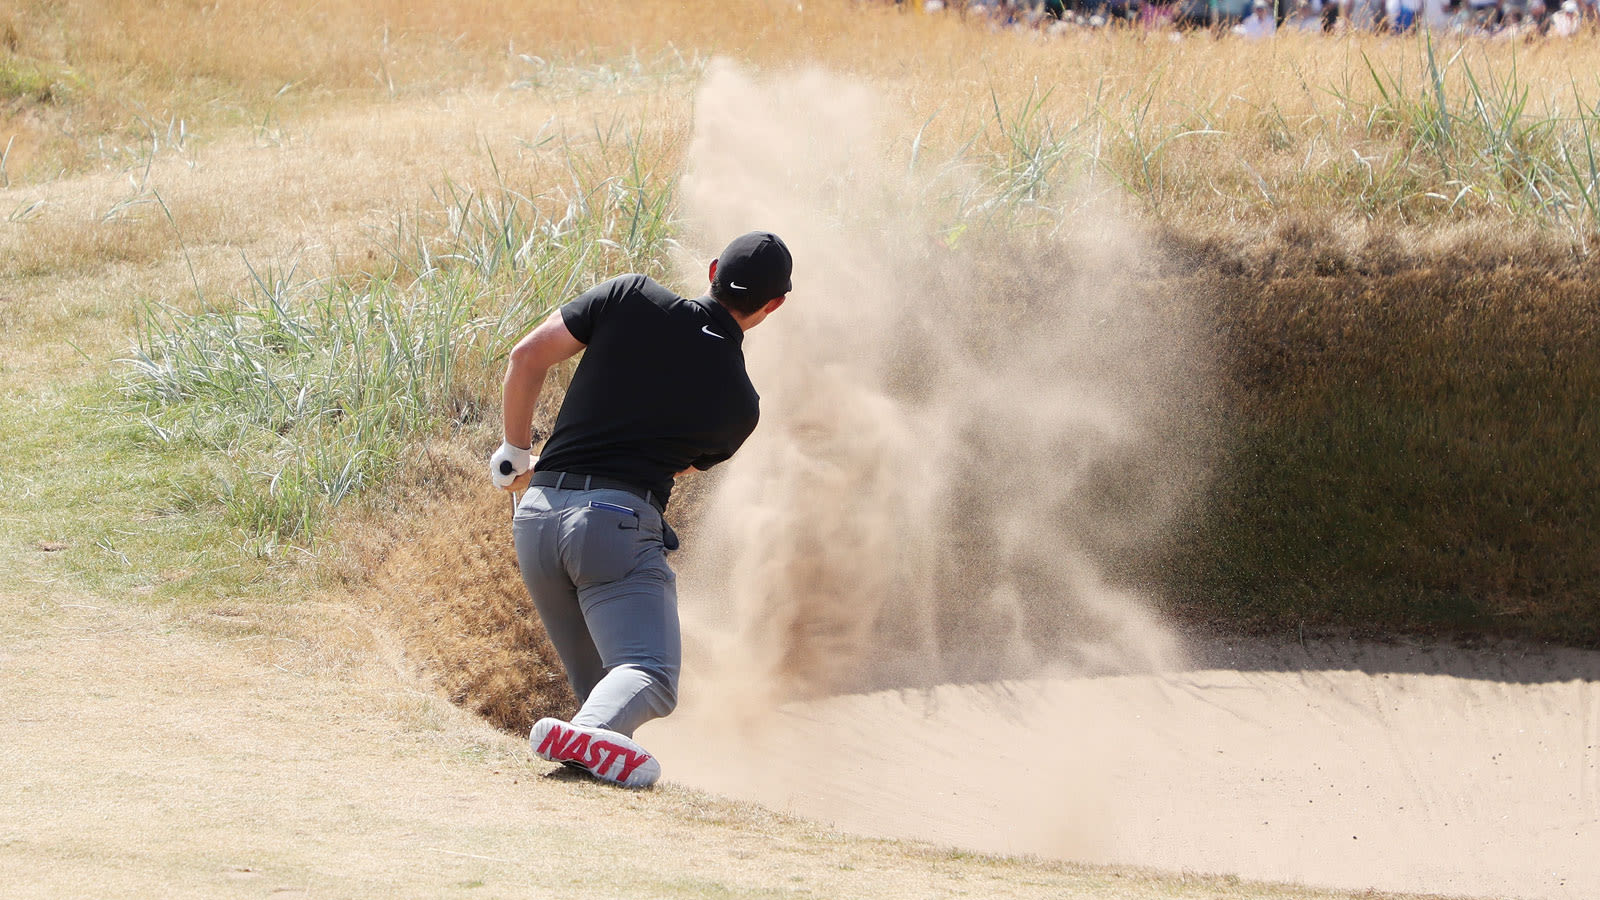 Rory McIlroy of N. Ireland hits his second shot from a bunker on the first hole during the first round of the 147th Open Championship at Carnoustie Golf Club on July 19, 2018 in Carnoustie, Scotland. (Photo by Francois Nel, Getty Images)